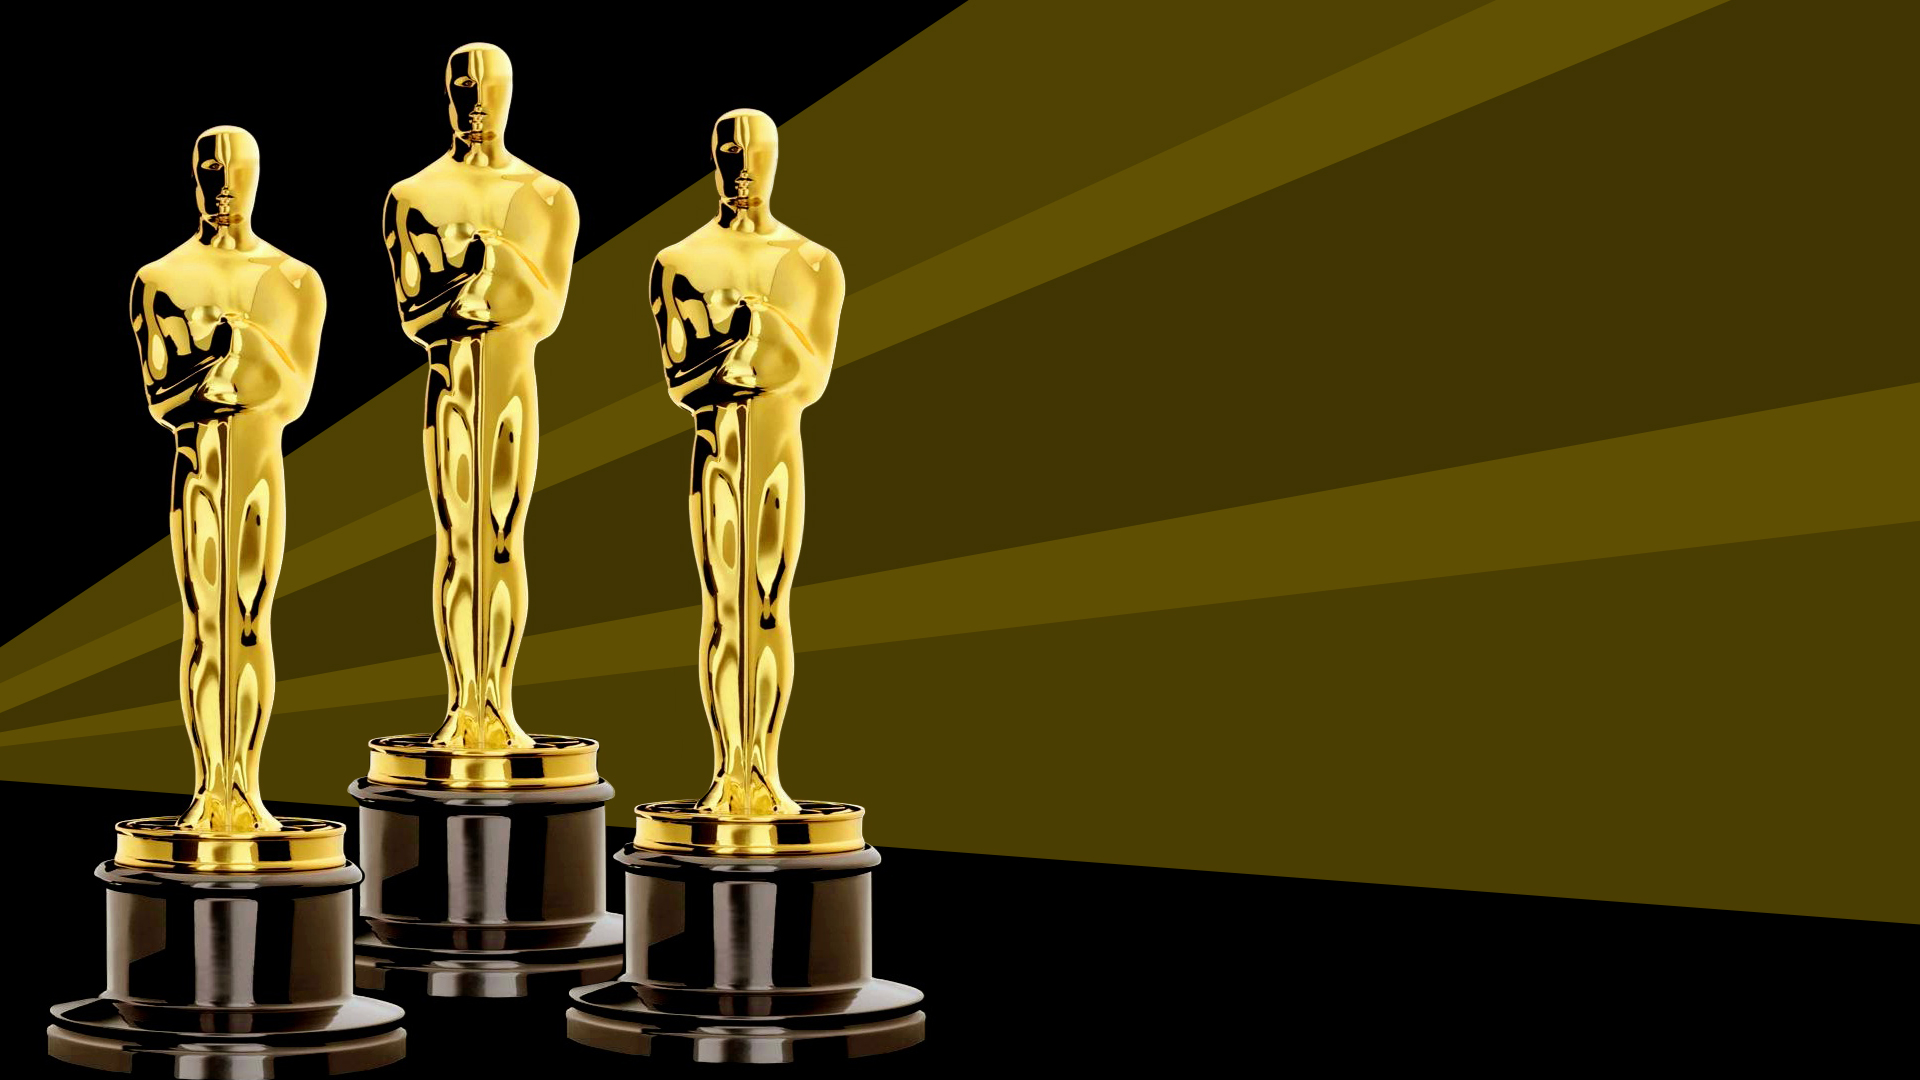 Are You Excited About This Year’s Oscar Ceremony